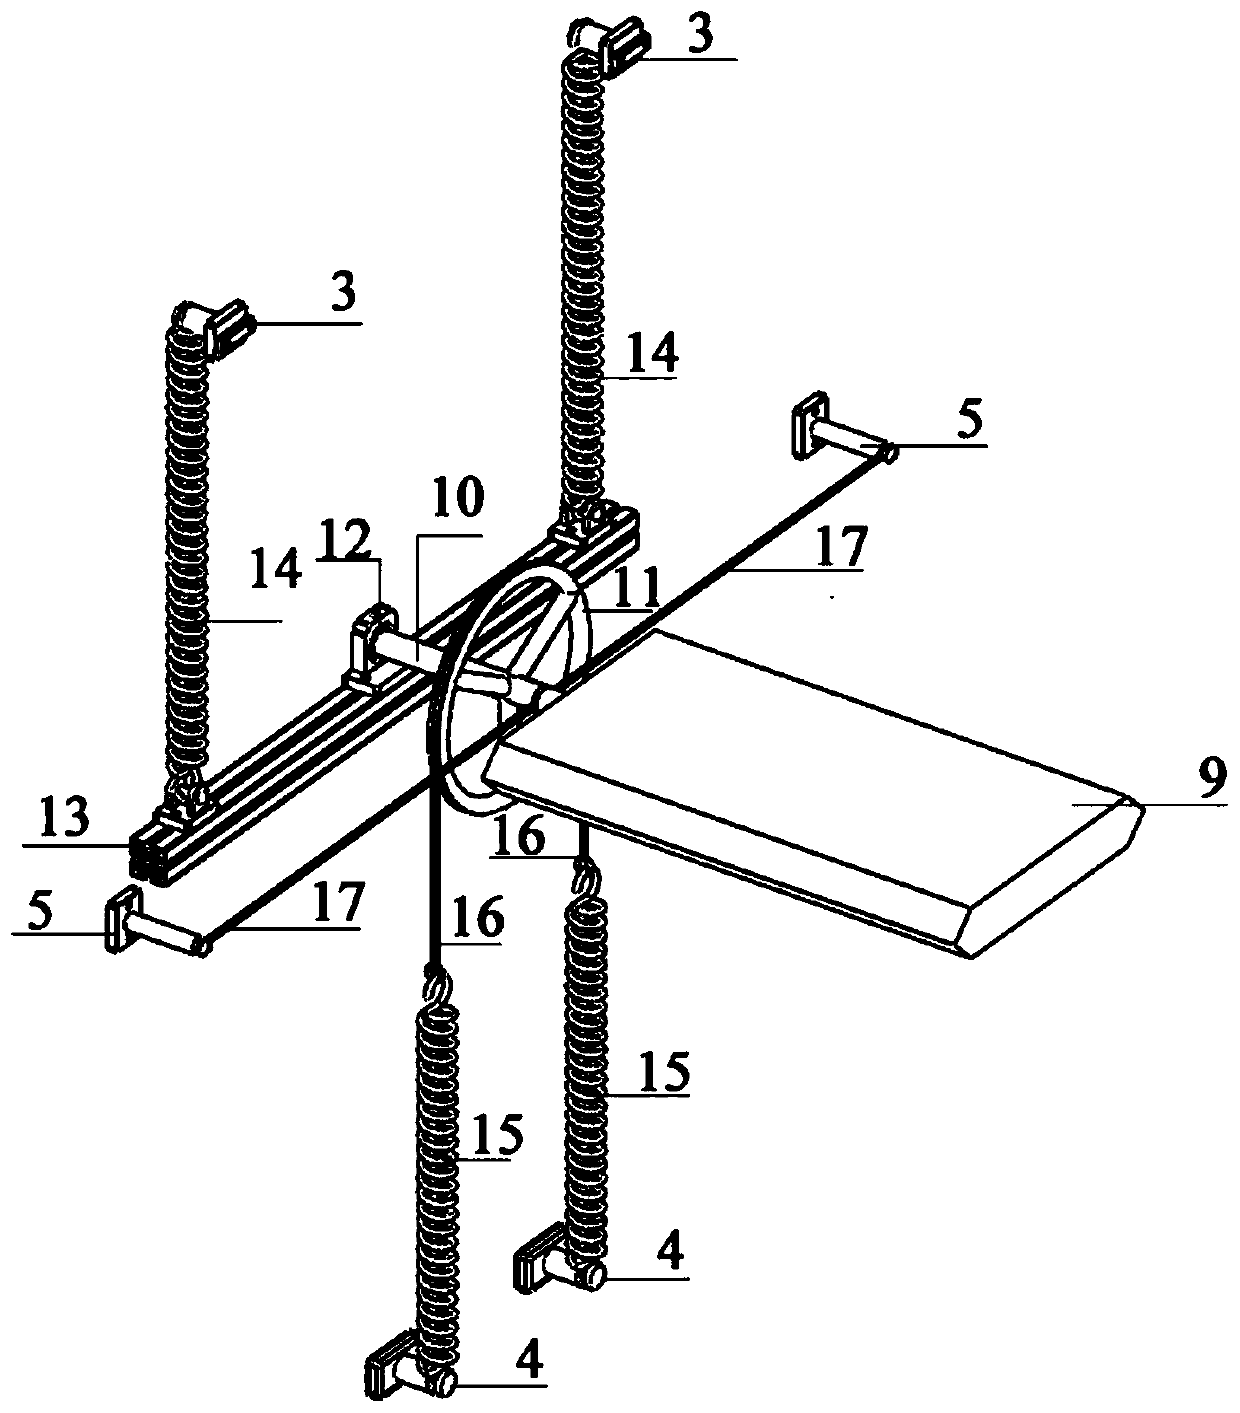 Vertical-torsion coupled large-amplitude free vibration wind tunnel experiment system